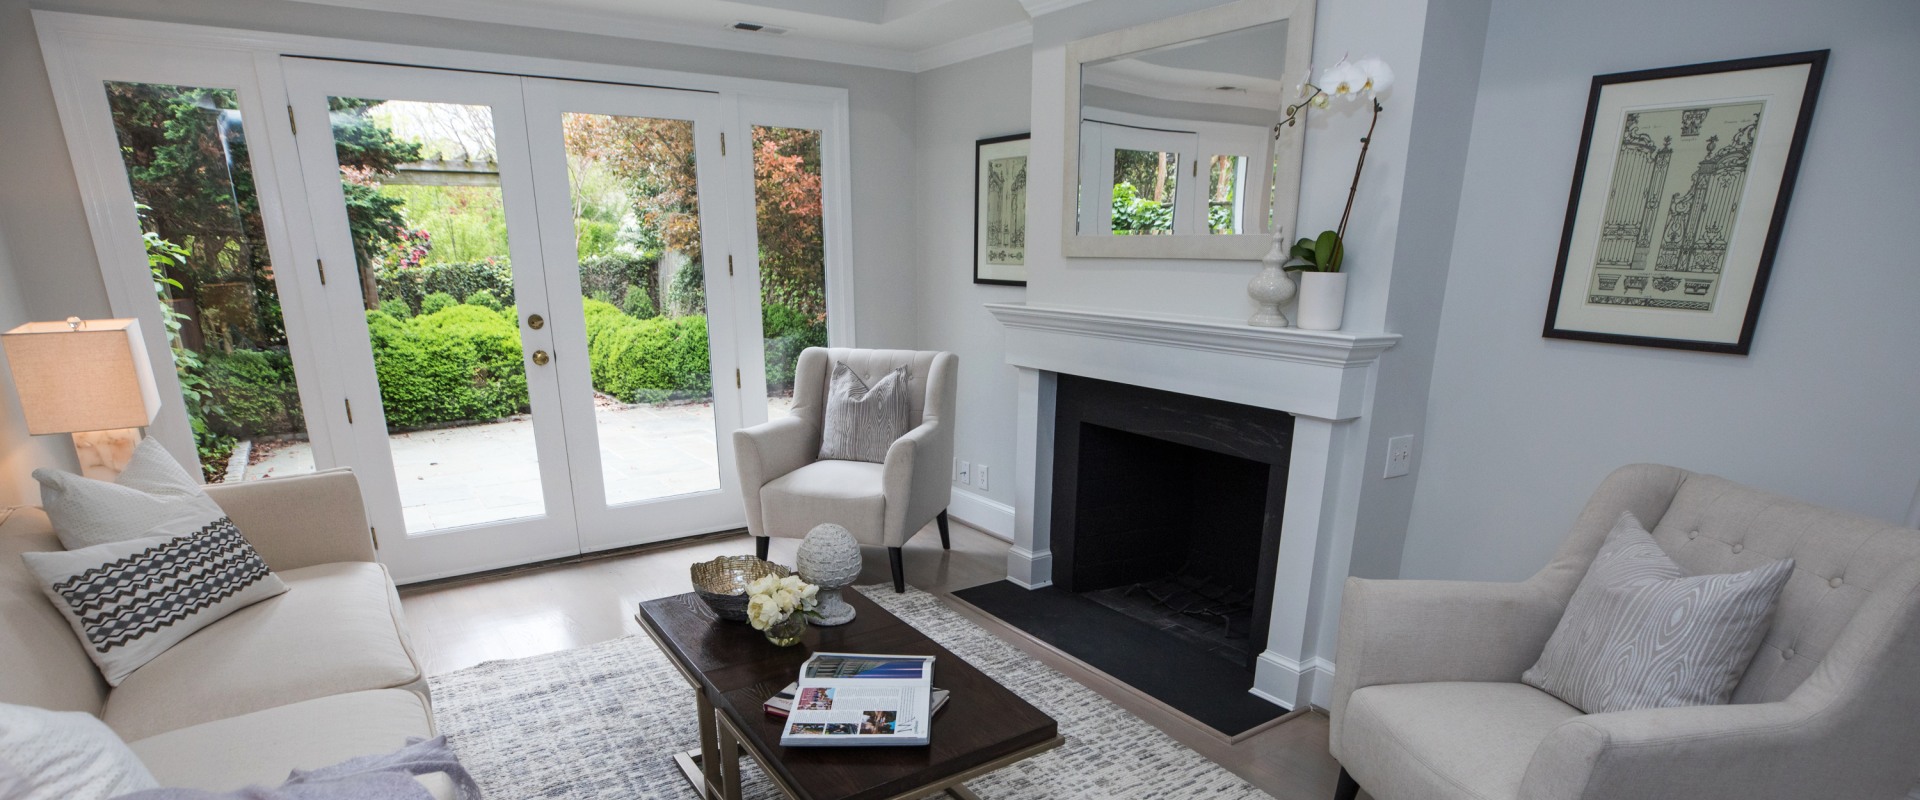 How does home staging benefit a seller?